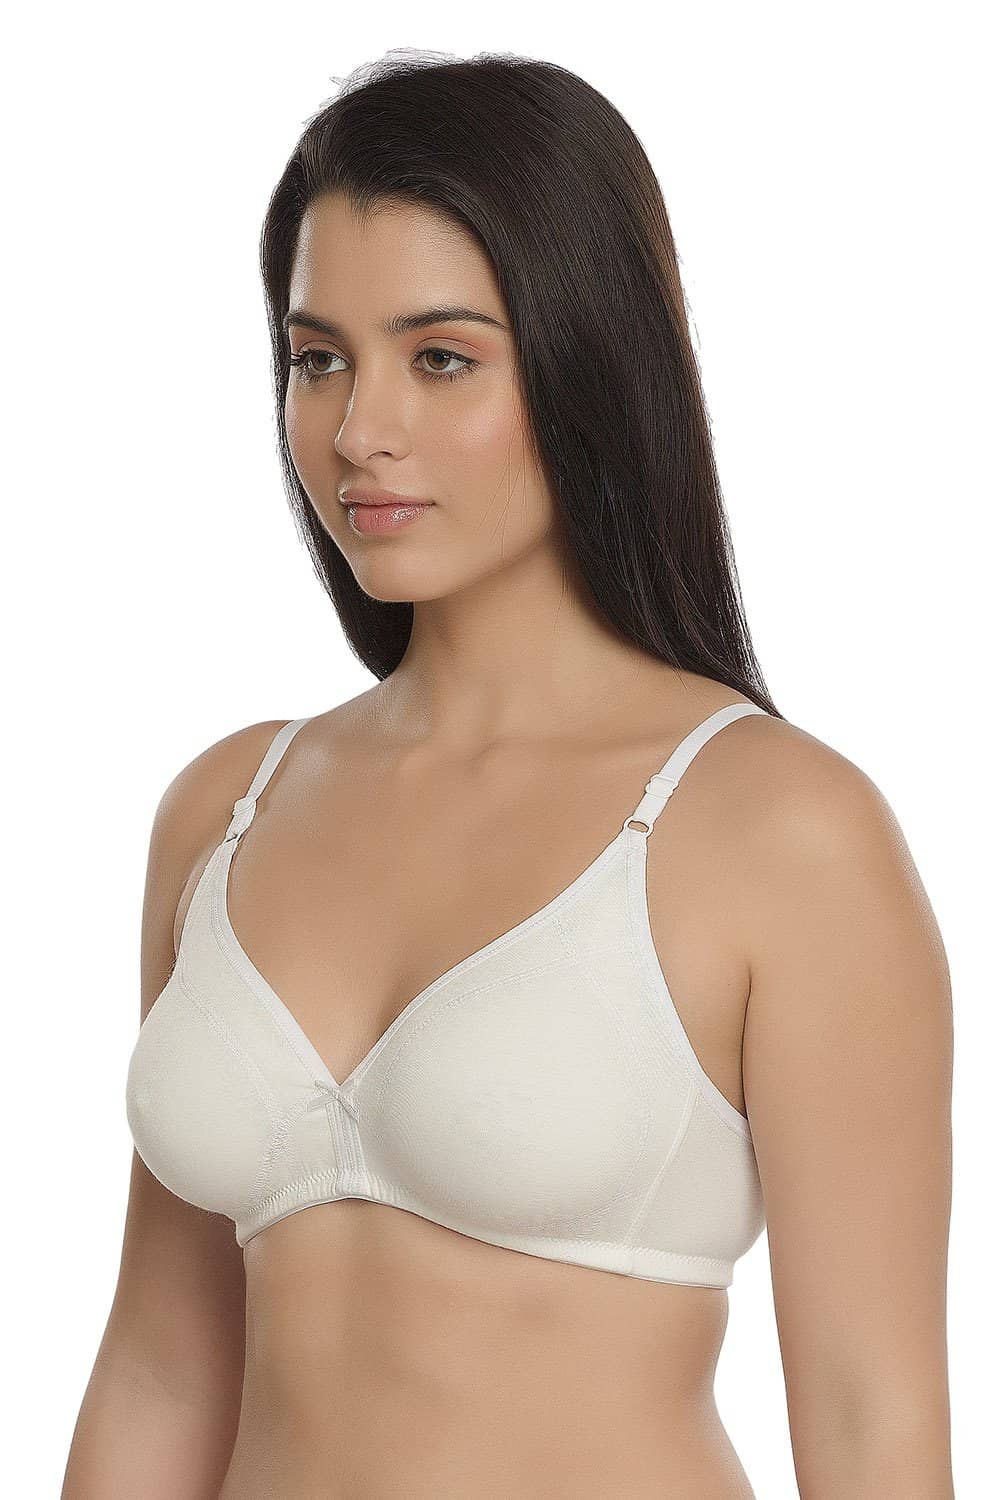 Ladies White Cotton Bra, Size: 28 To 50, Packaging Type: Packet at